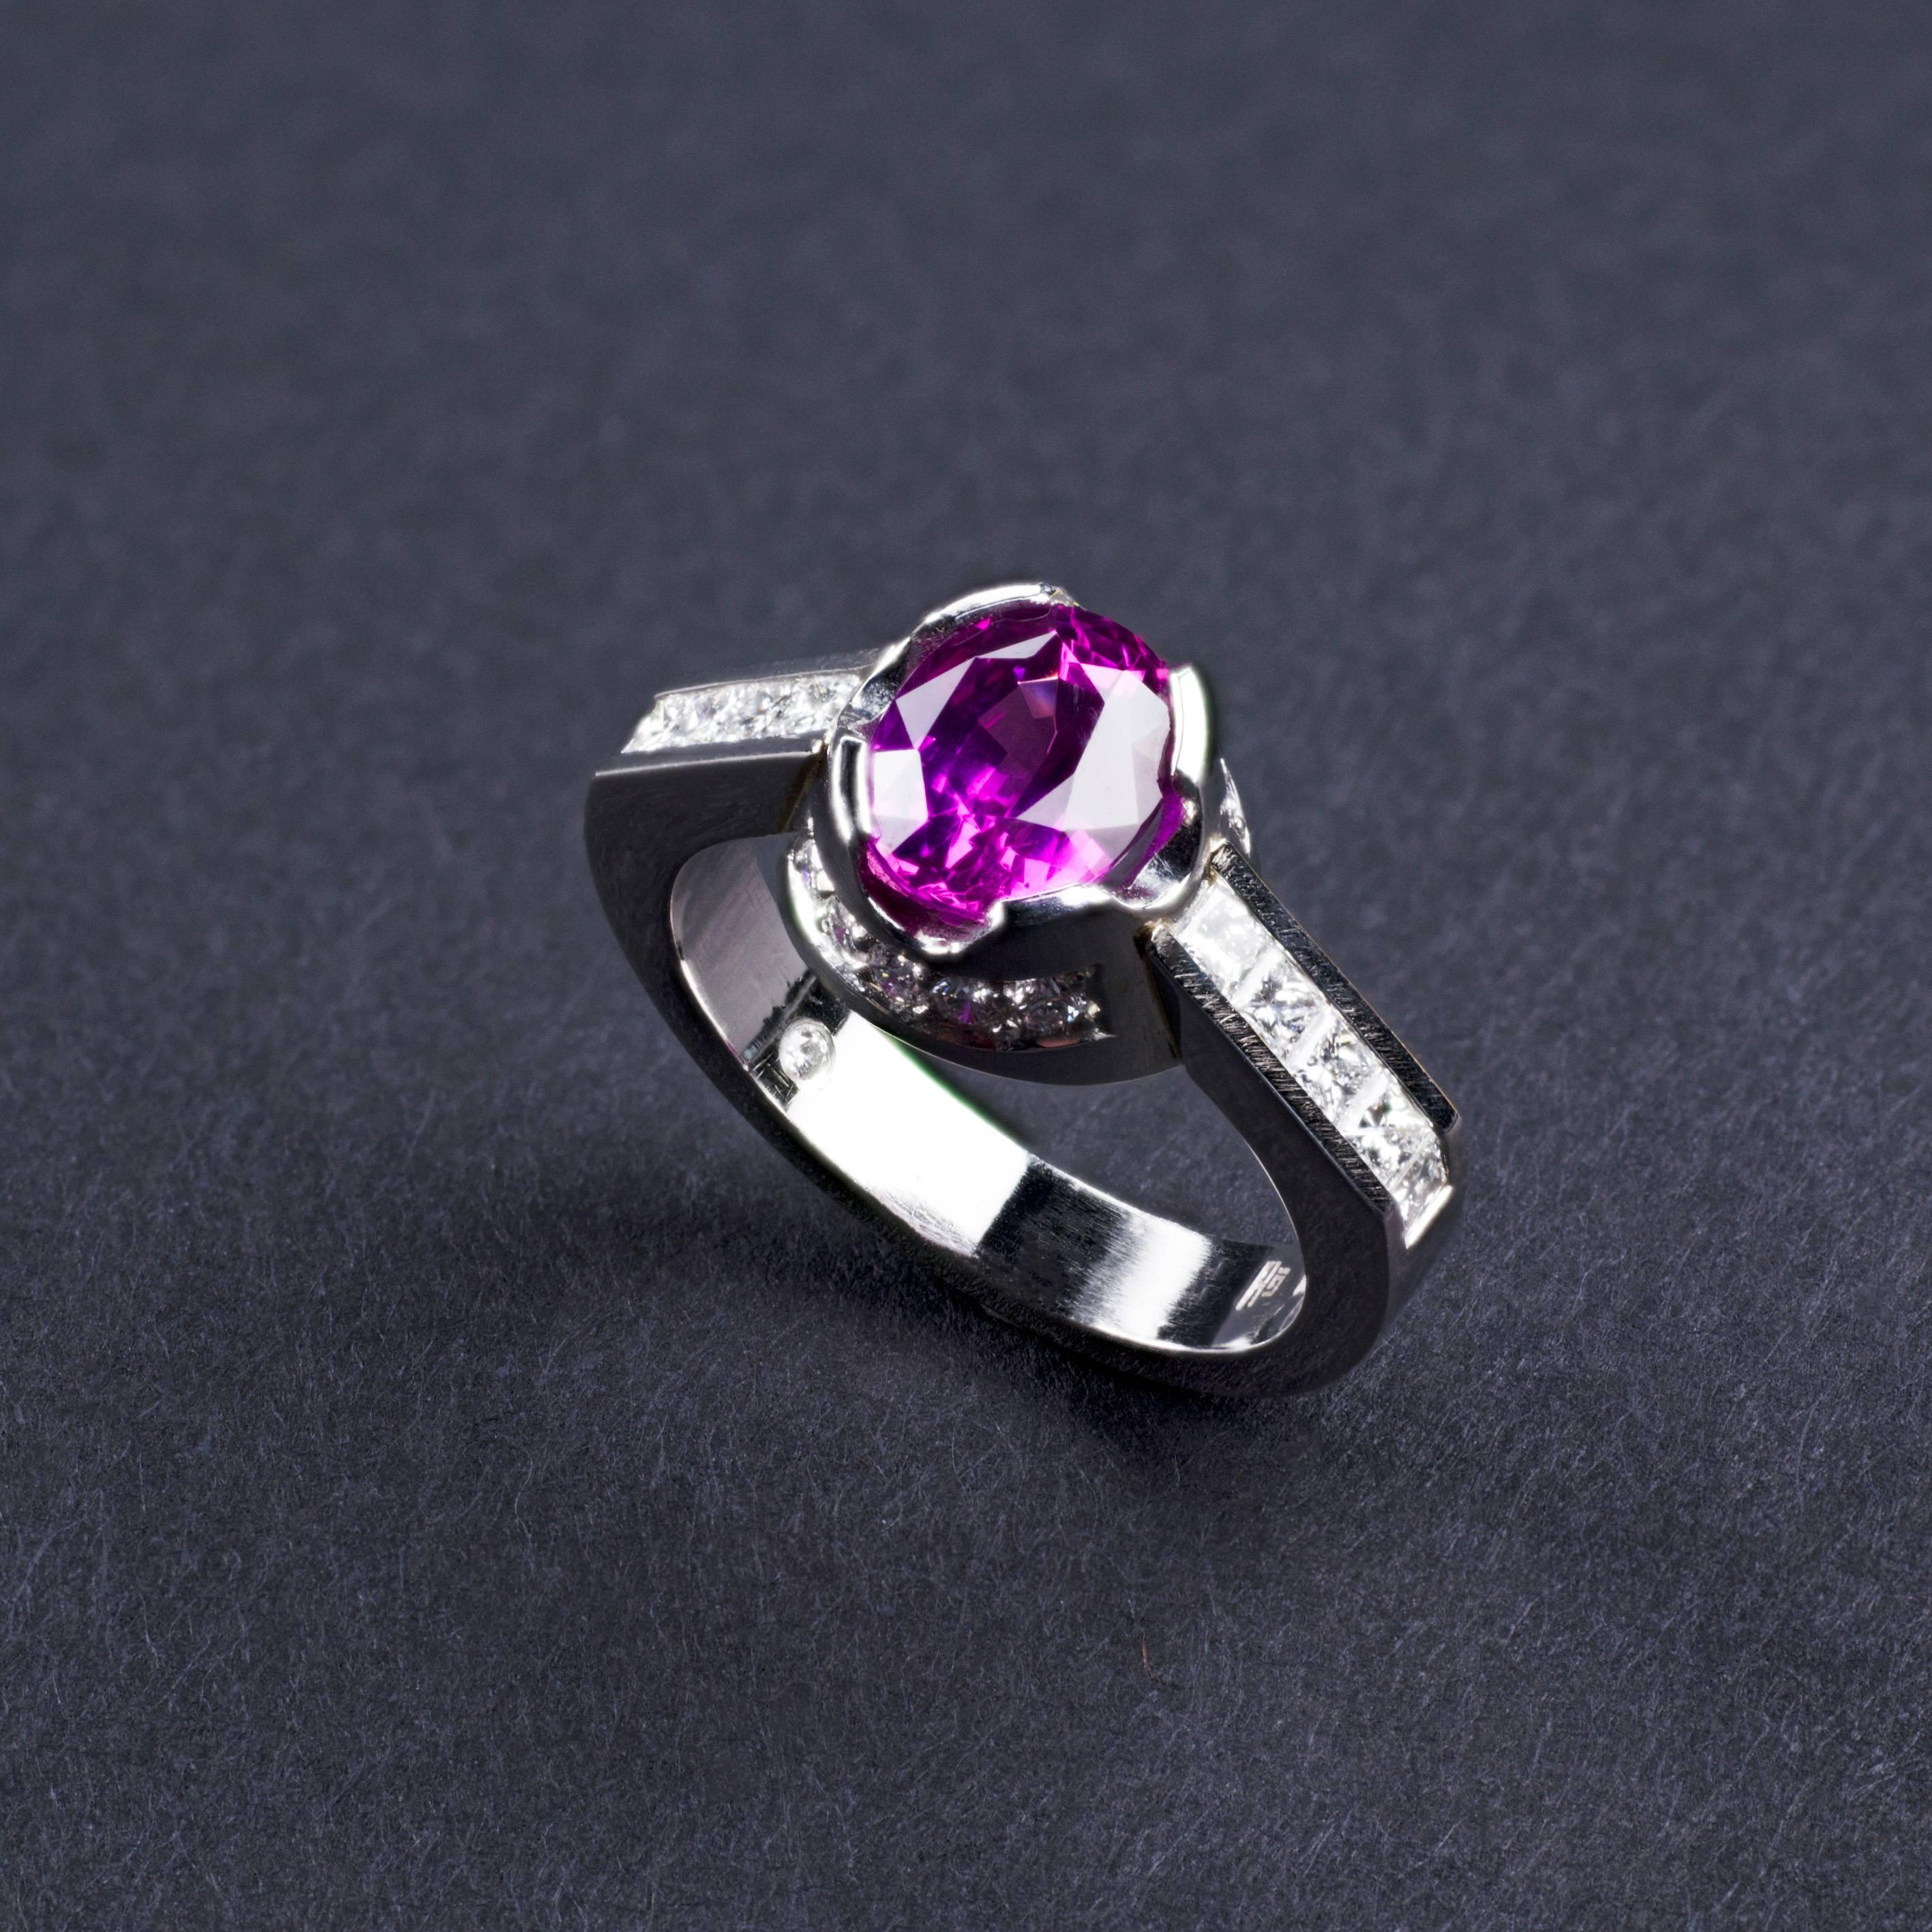 A contemporary classic, this elegant platinum ring is set with a 2.13ct oval natural pink sapphire from Sri Lanka.
The rare central gemstone is star and step cut and enhanced by fine princess cut 0.47ct rare white vvs and brilliant cut 0.19ct rare